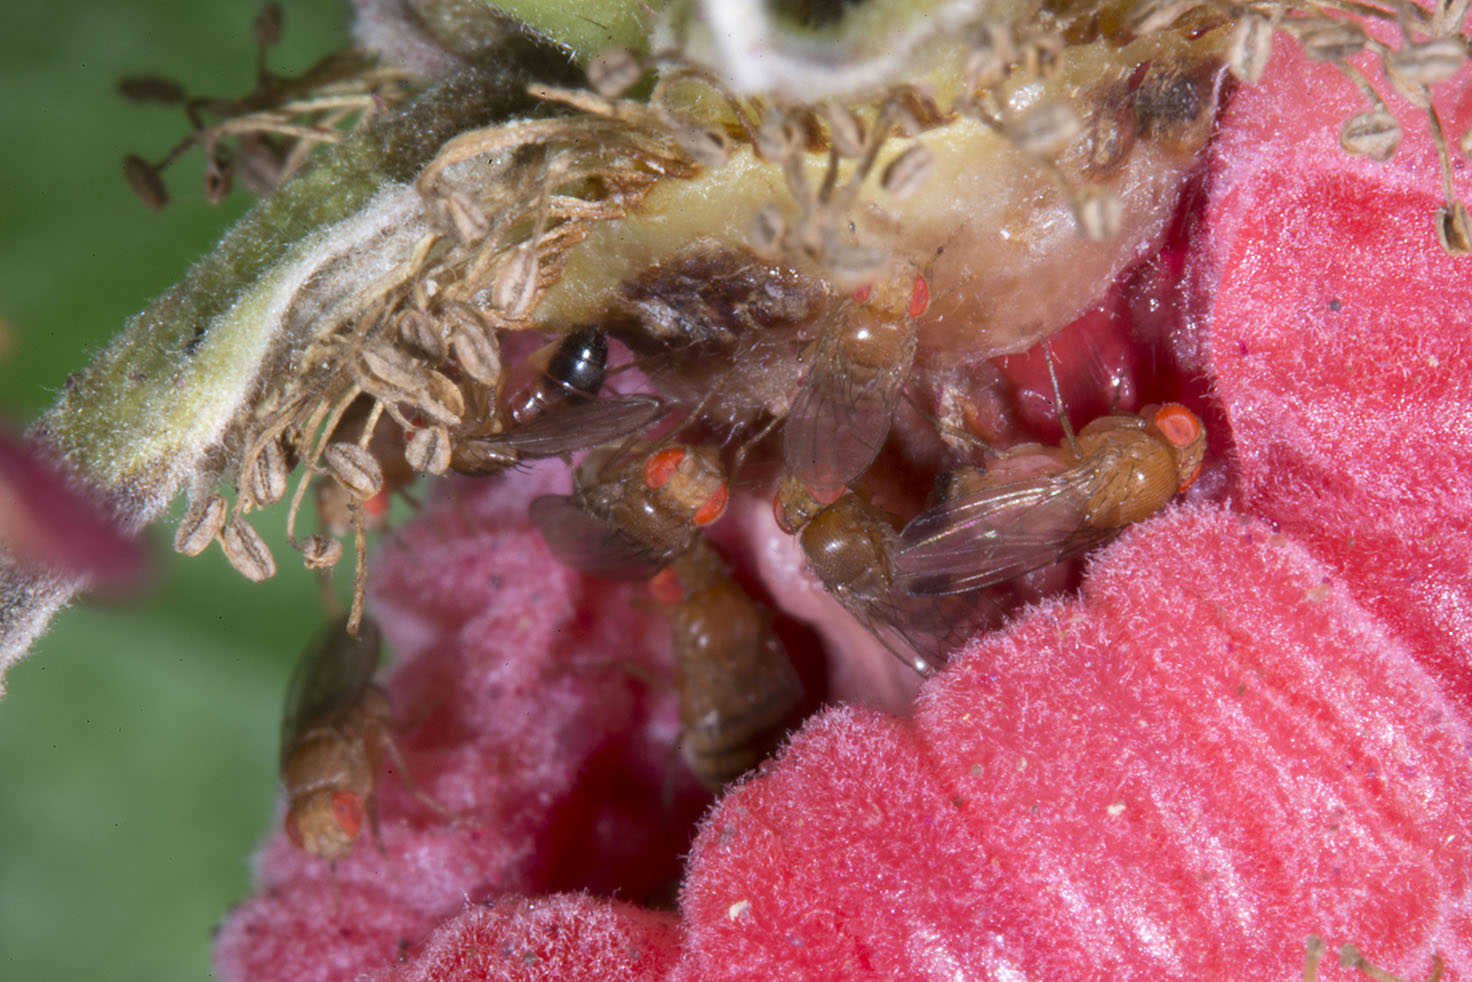 Both male and female SWD adults are seen inside this raspberry fruit